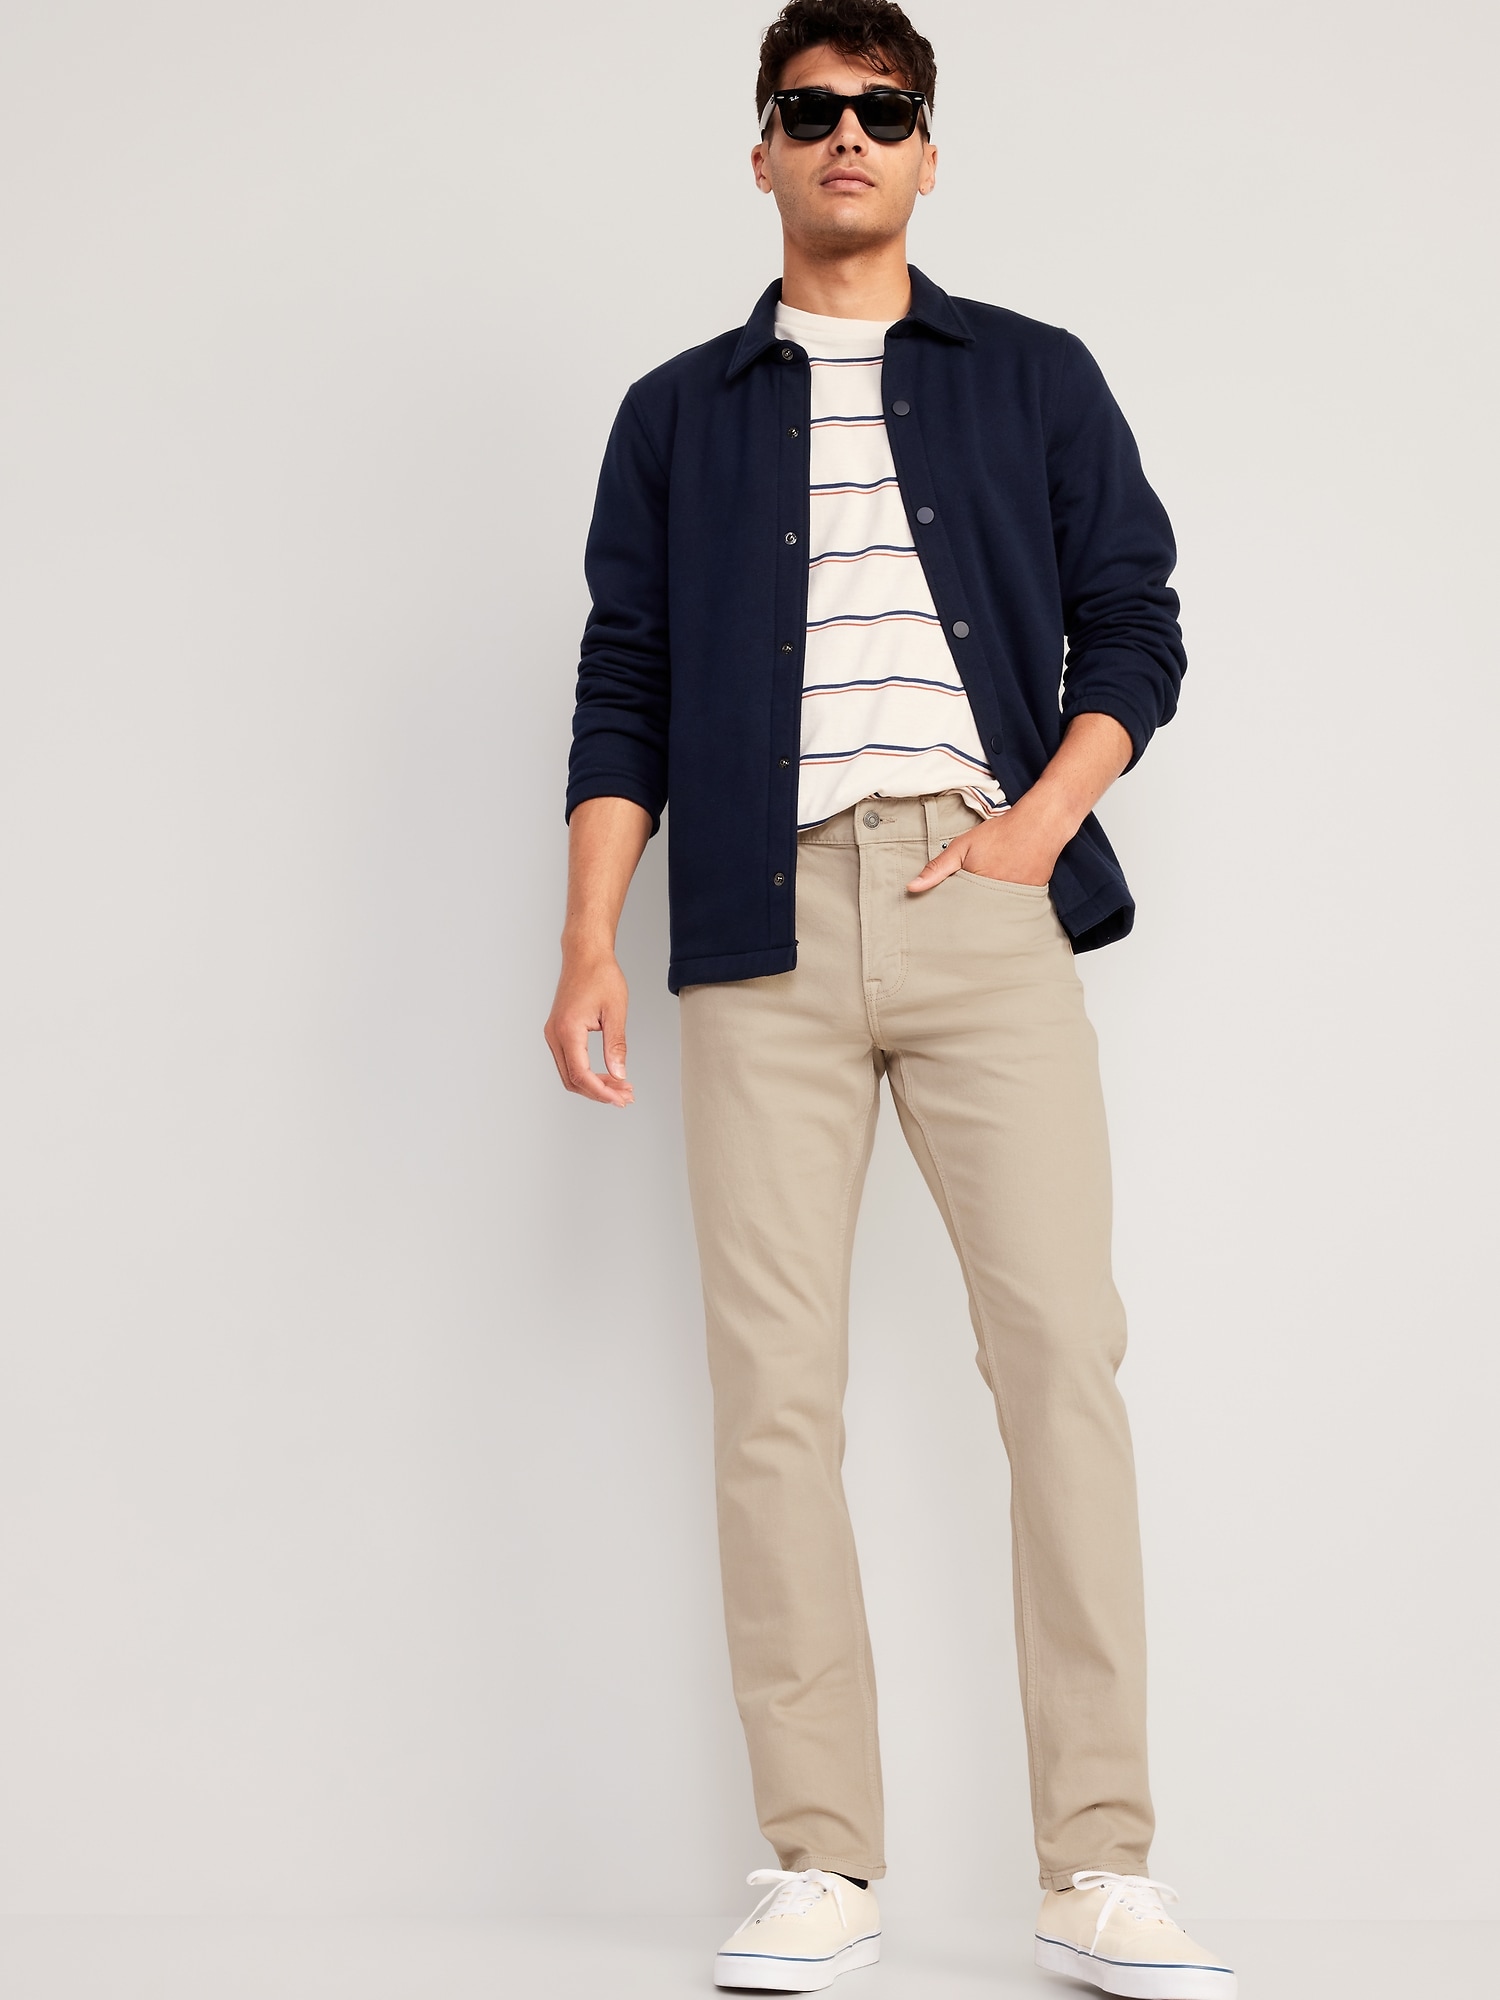 In Review: Old Navy All-Temp Twill Five-Pocket Pants